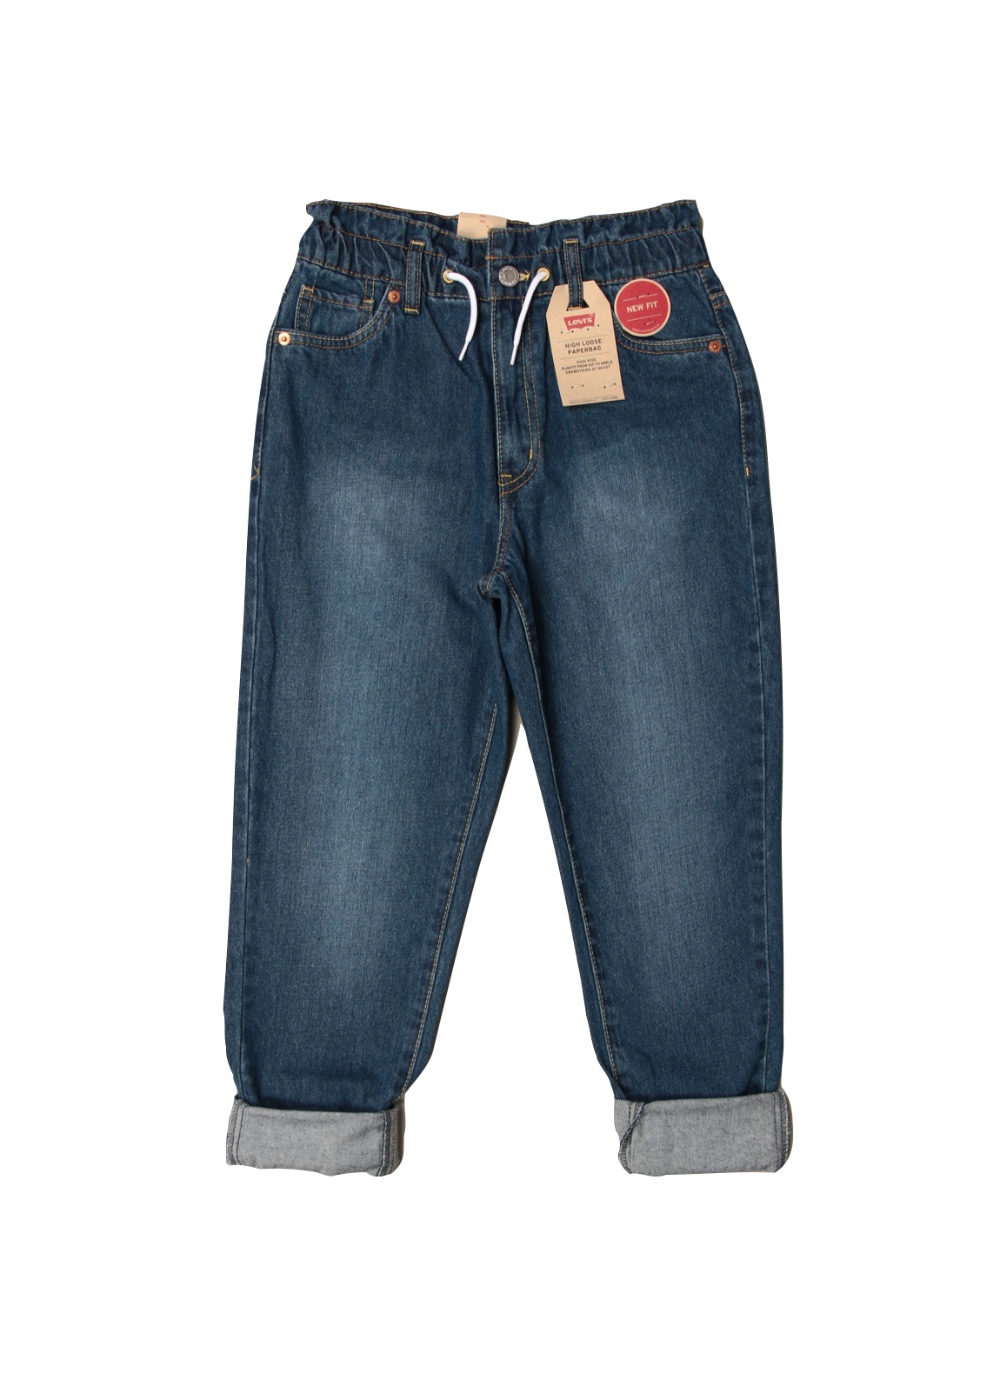 Featured image for “LEVI'S JEANS BAMBINA”